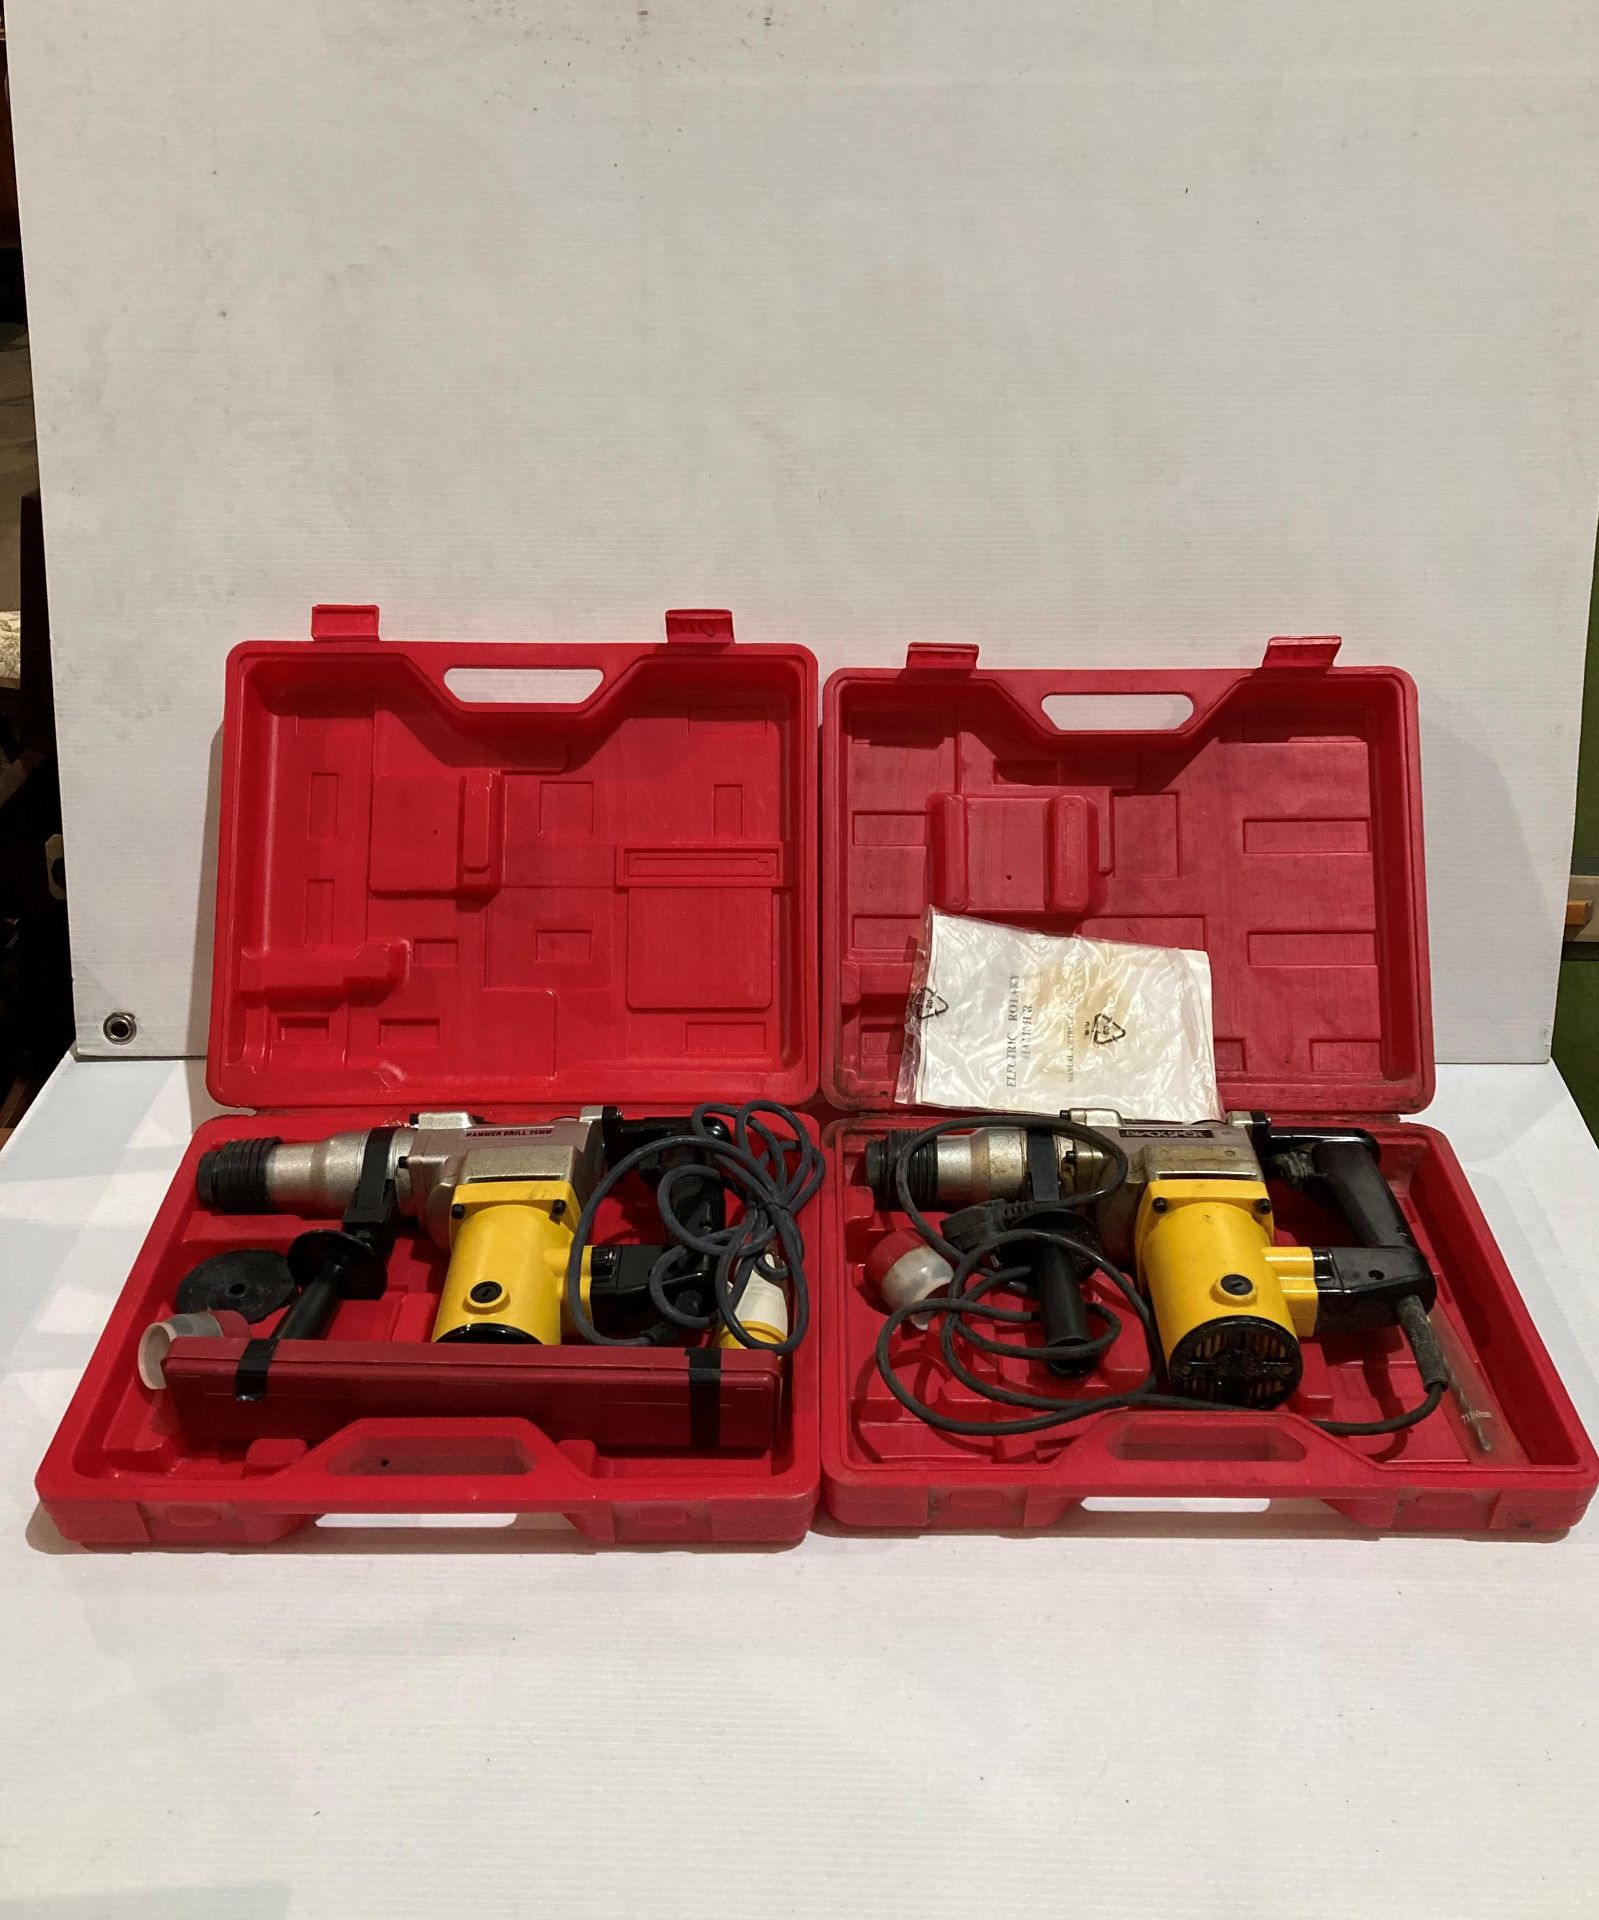 Two assorted electric Rotary hammer drills by Blackspur (26mm) (no test - low voltage) (Saleroom